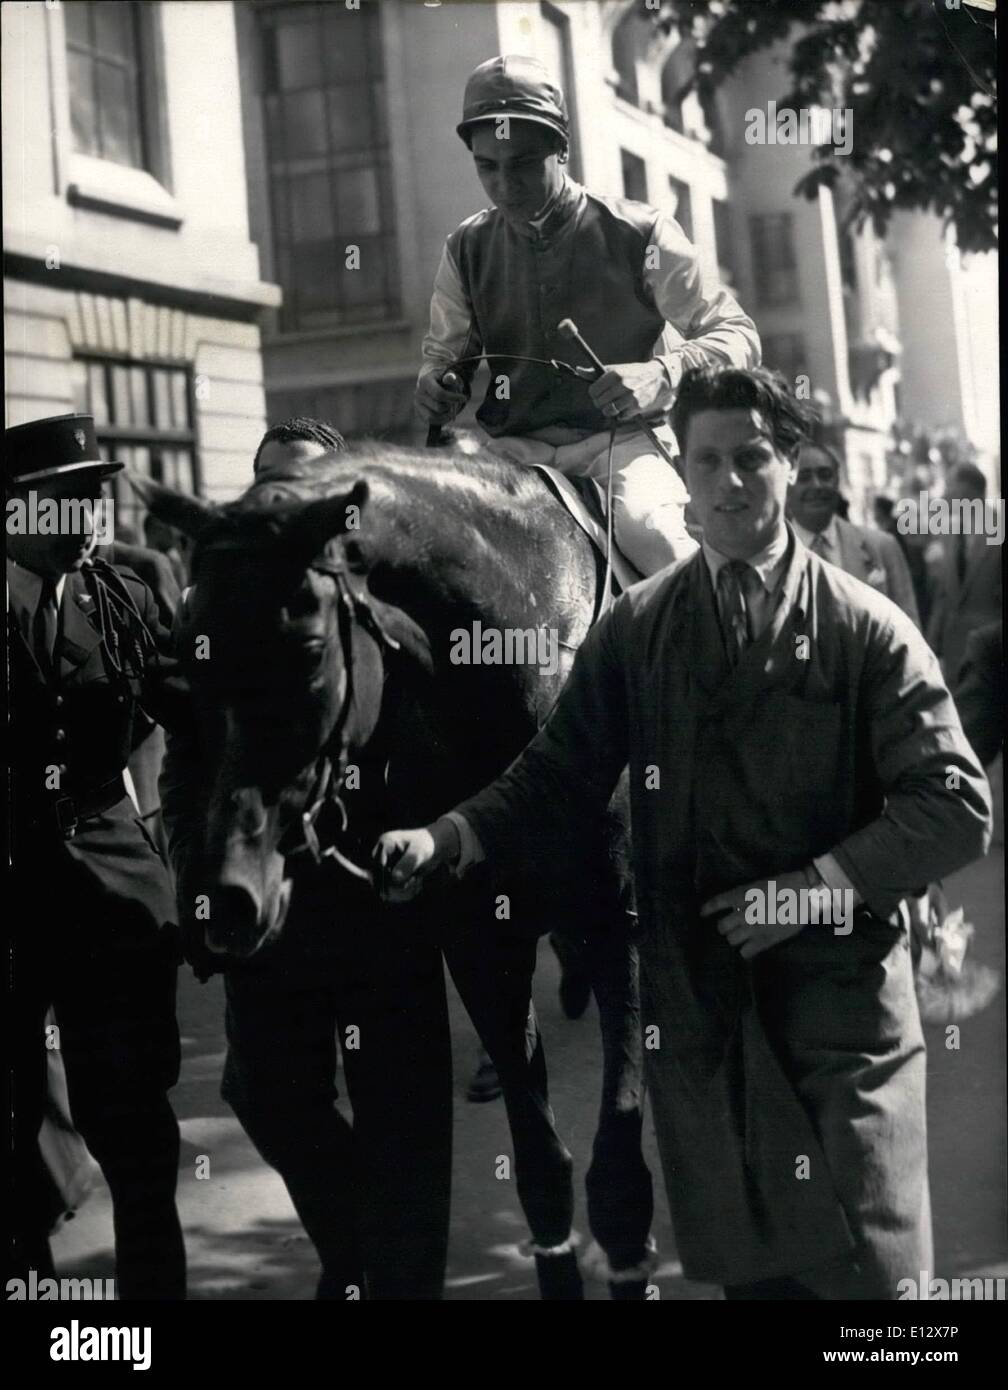 Feb. 25, 2012 - Grand Steeplechase at Auteuil. Pharamond III (ridden by Maschio), winner of the Grand Steeplechase at Auteuil being led in after its victory. June 21/53 Stock Photo